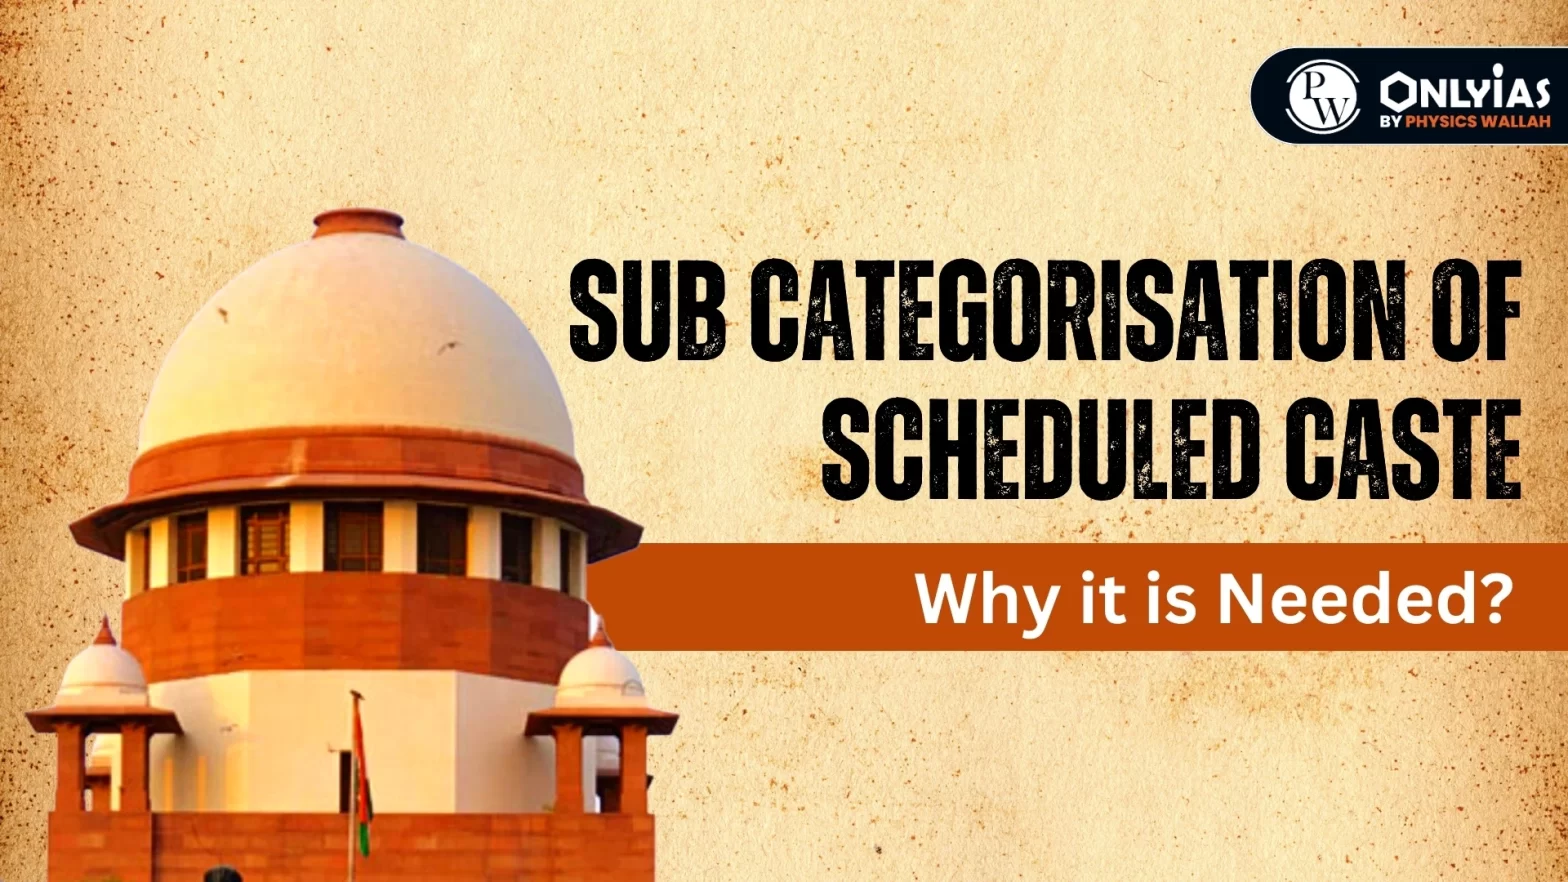 Sub Categorisation of Scheduled Caste: Why it is Needed?